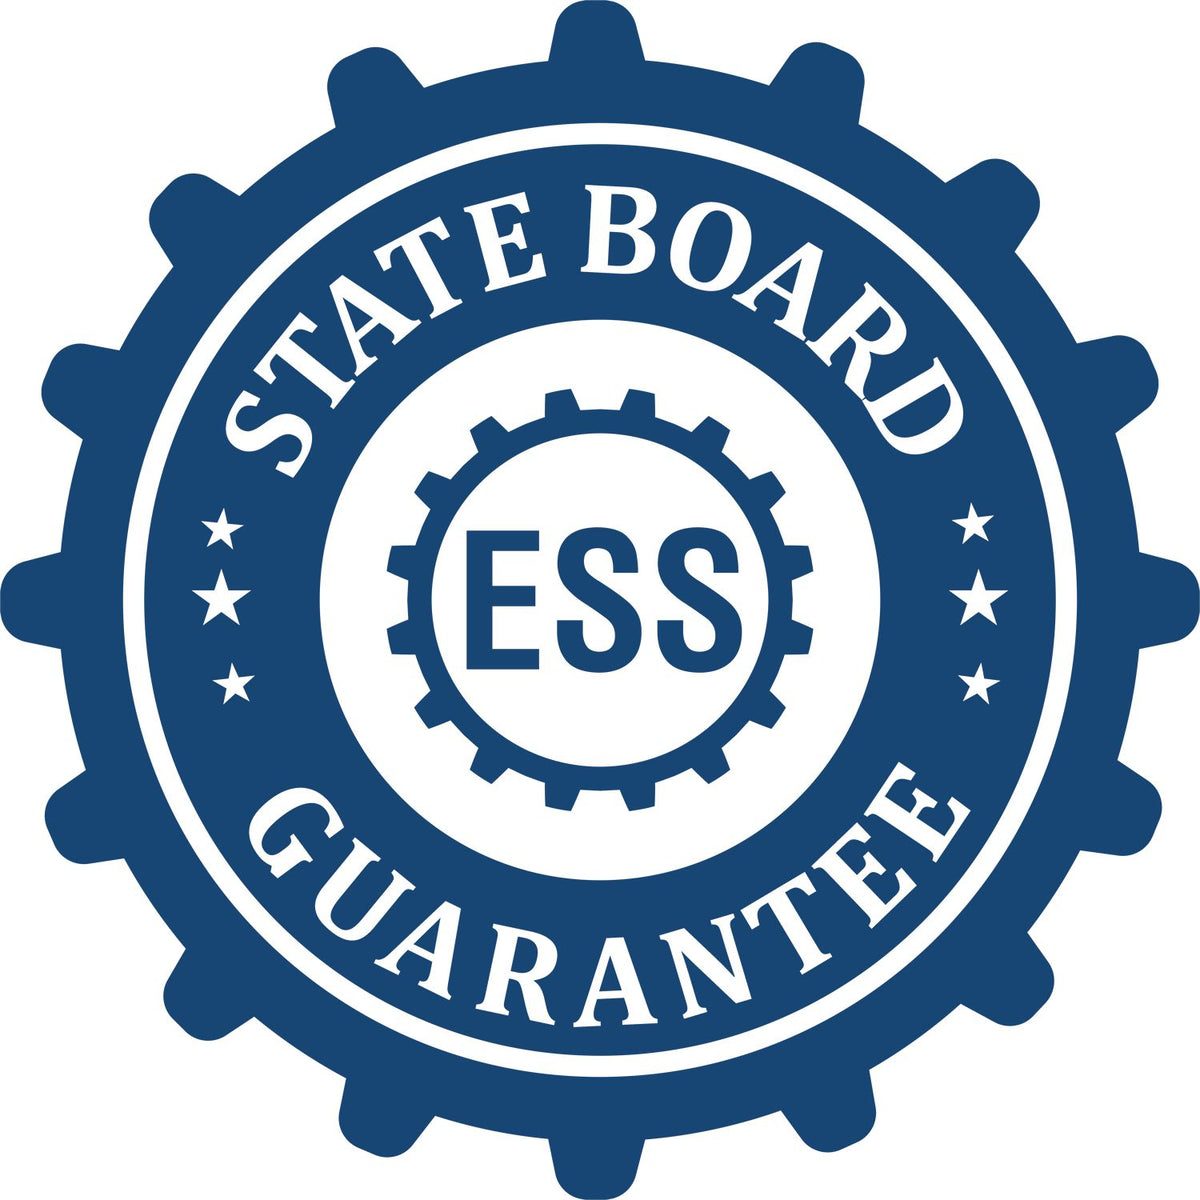 An emblem in a gear shape illustrating a state board guarantee for the Arizona Professional Engineer Seal Stamp product.